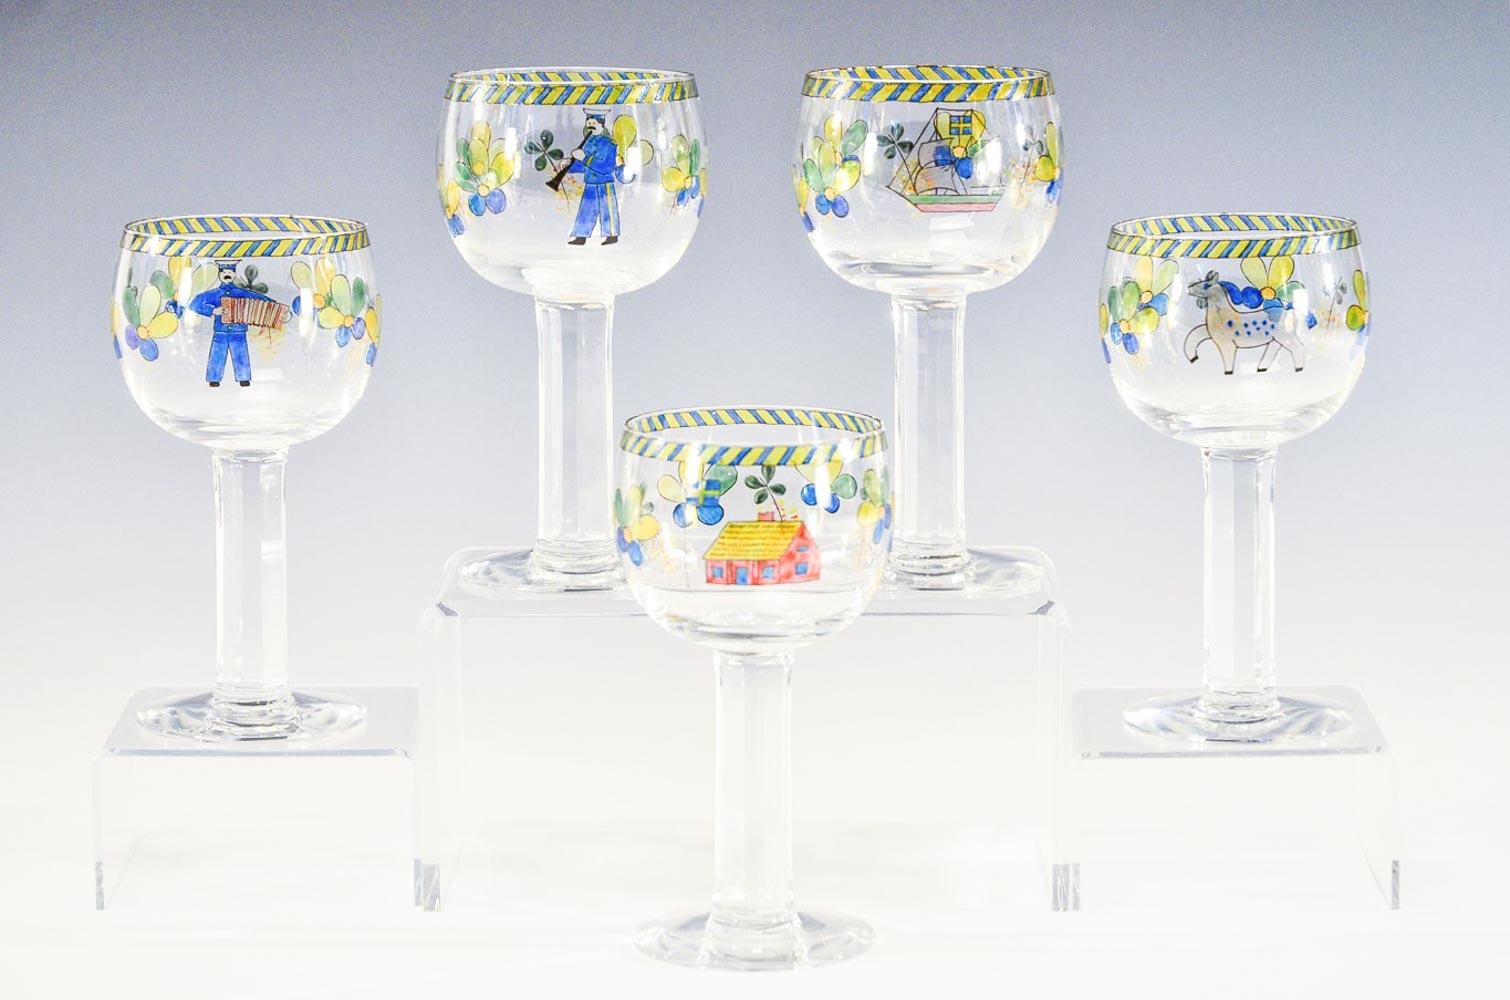 A wonderful set of 11 large goblets, made by Orrefors with panel cut and polished columnar stems. Each signed glass is individually hand painted with whimsical and playful 